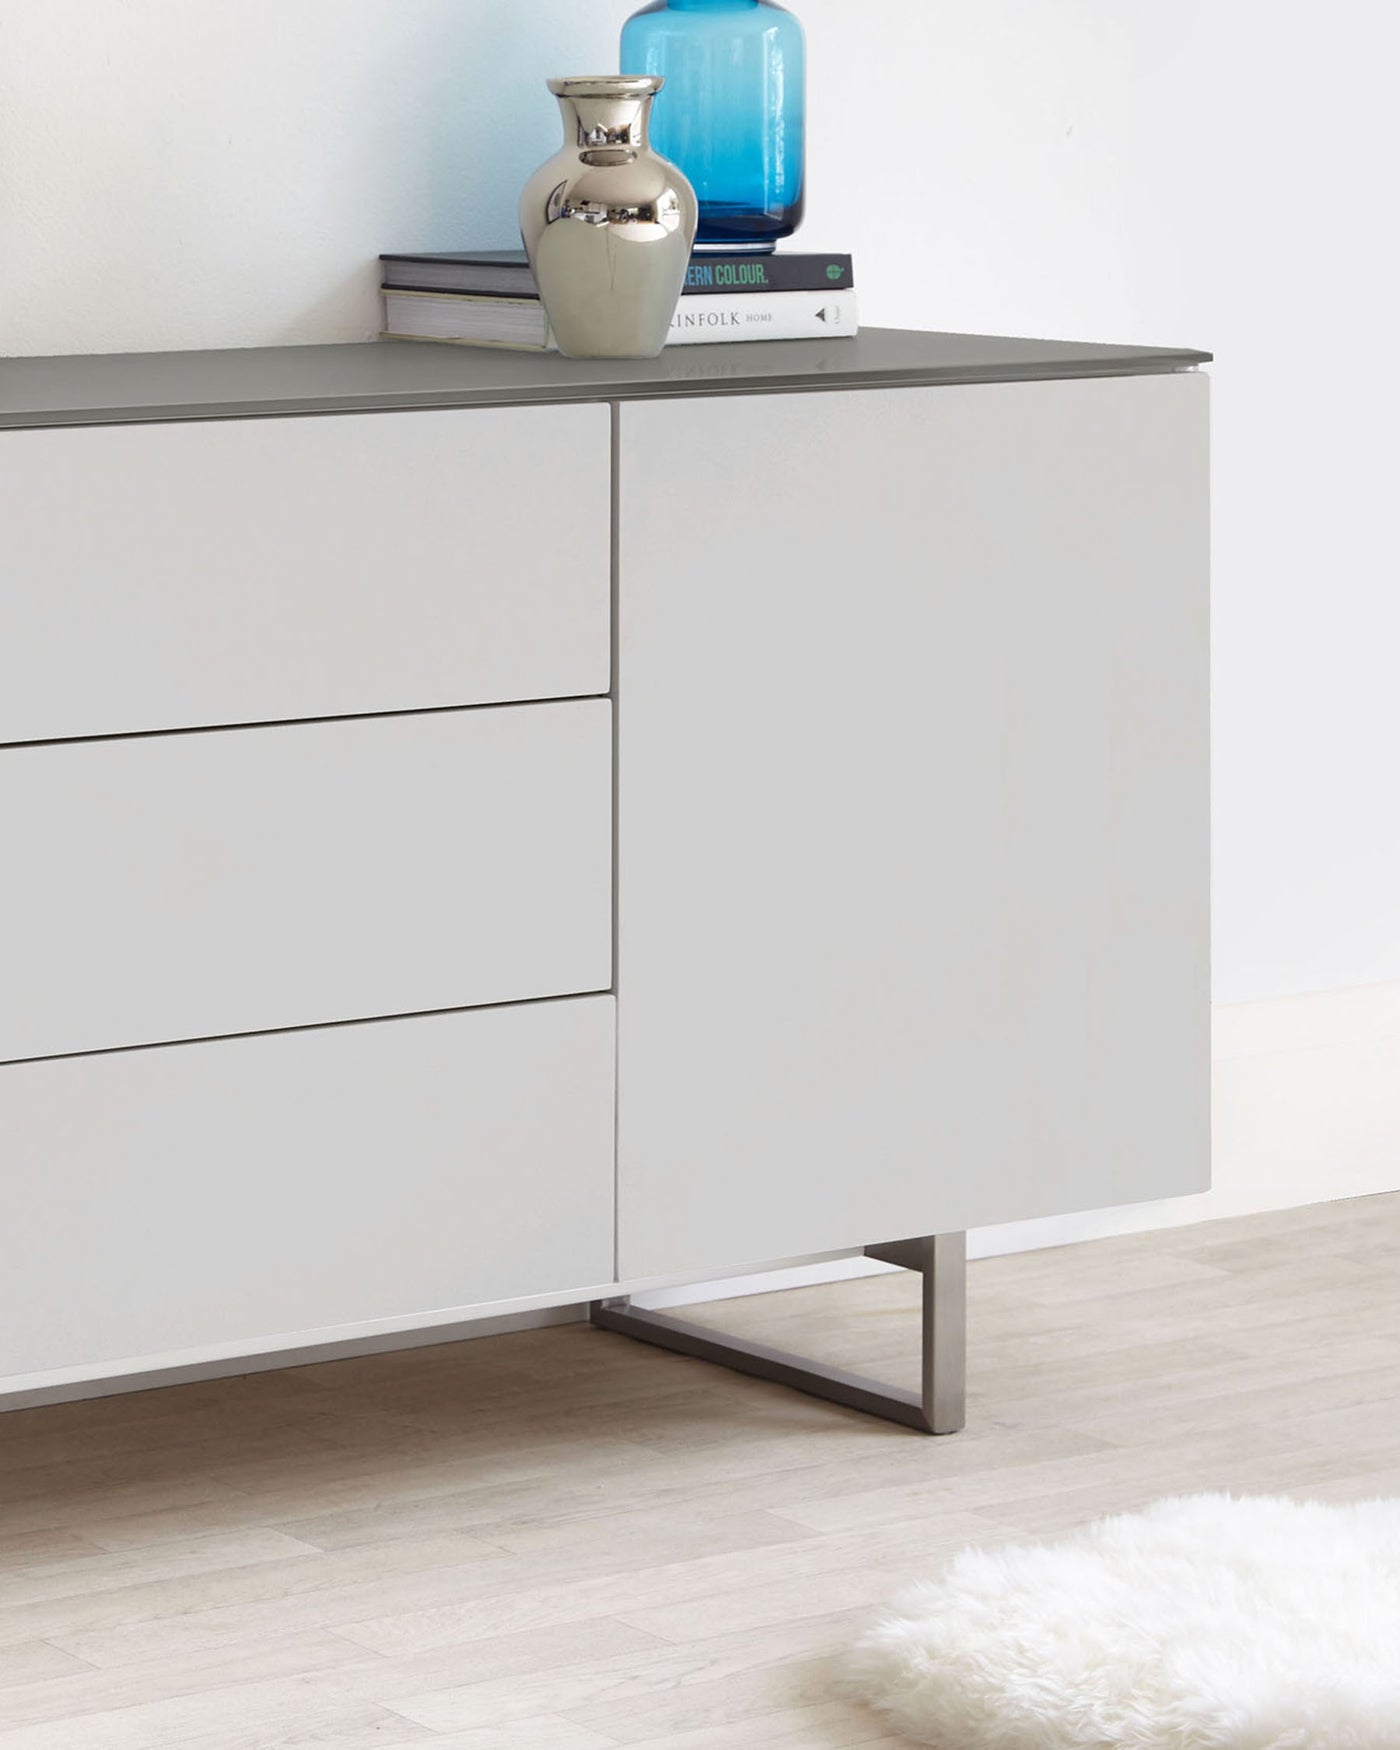 Modern minimalist light grey sideboard with sleek lines, featuring three flush drawers and a distinctive metal base in a brushed finish.